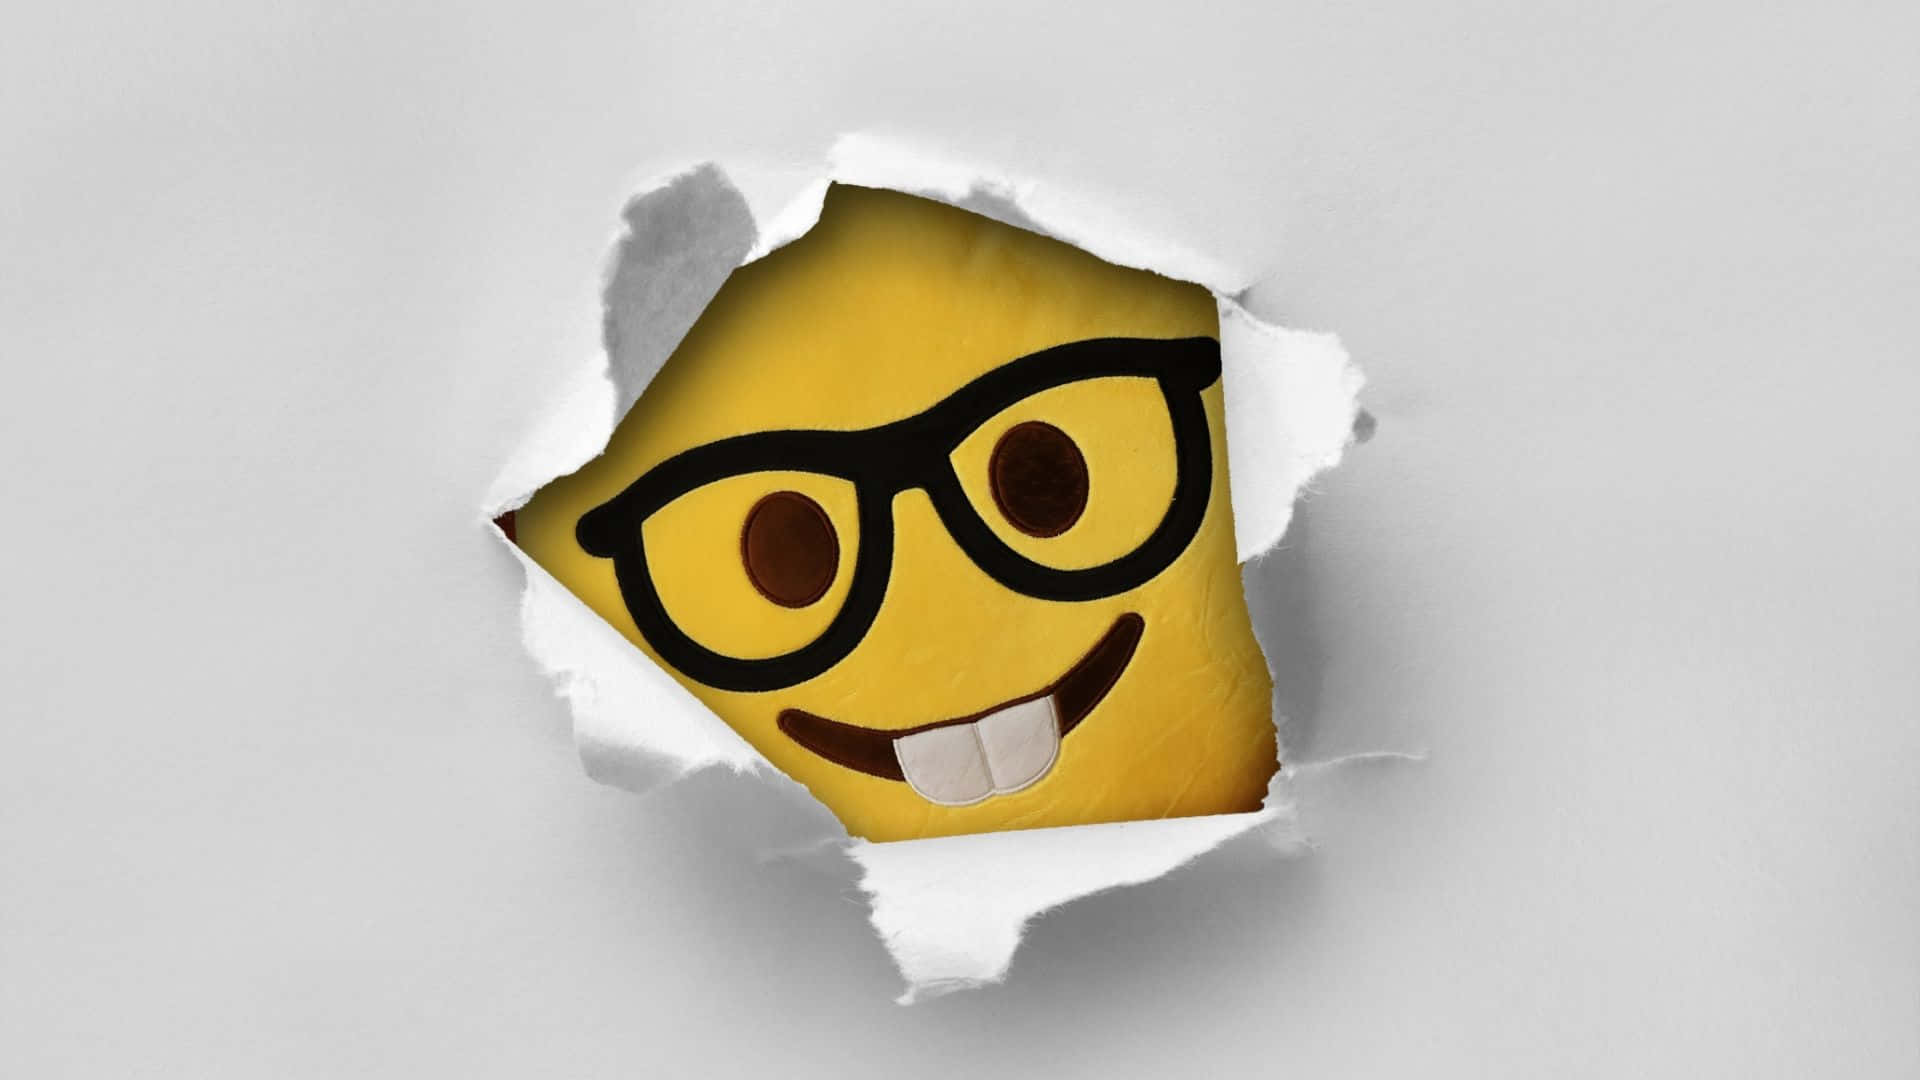 Cheerful Smiley Face on a Vibrant Yellow Background